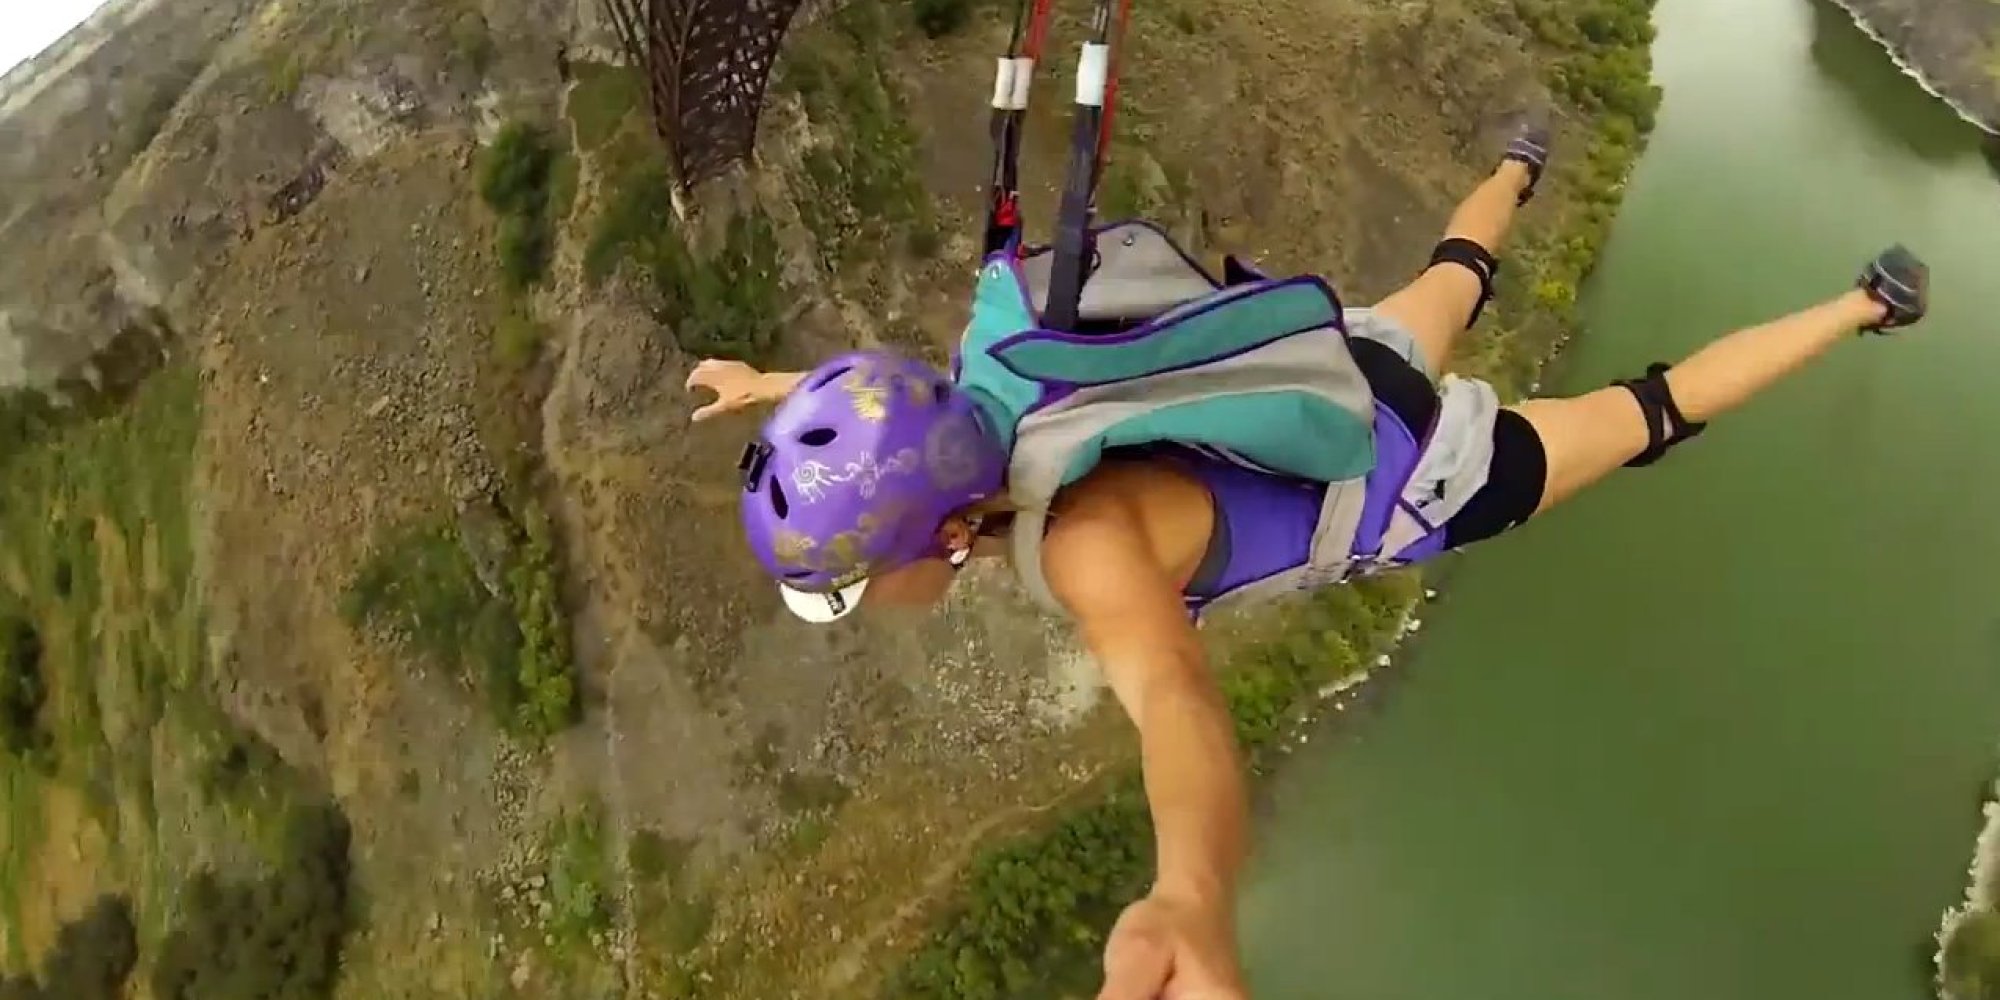 Insane Base Jumping Will Make Your Heart Jump Out Of Your Chest ...